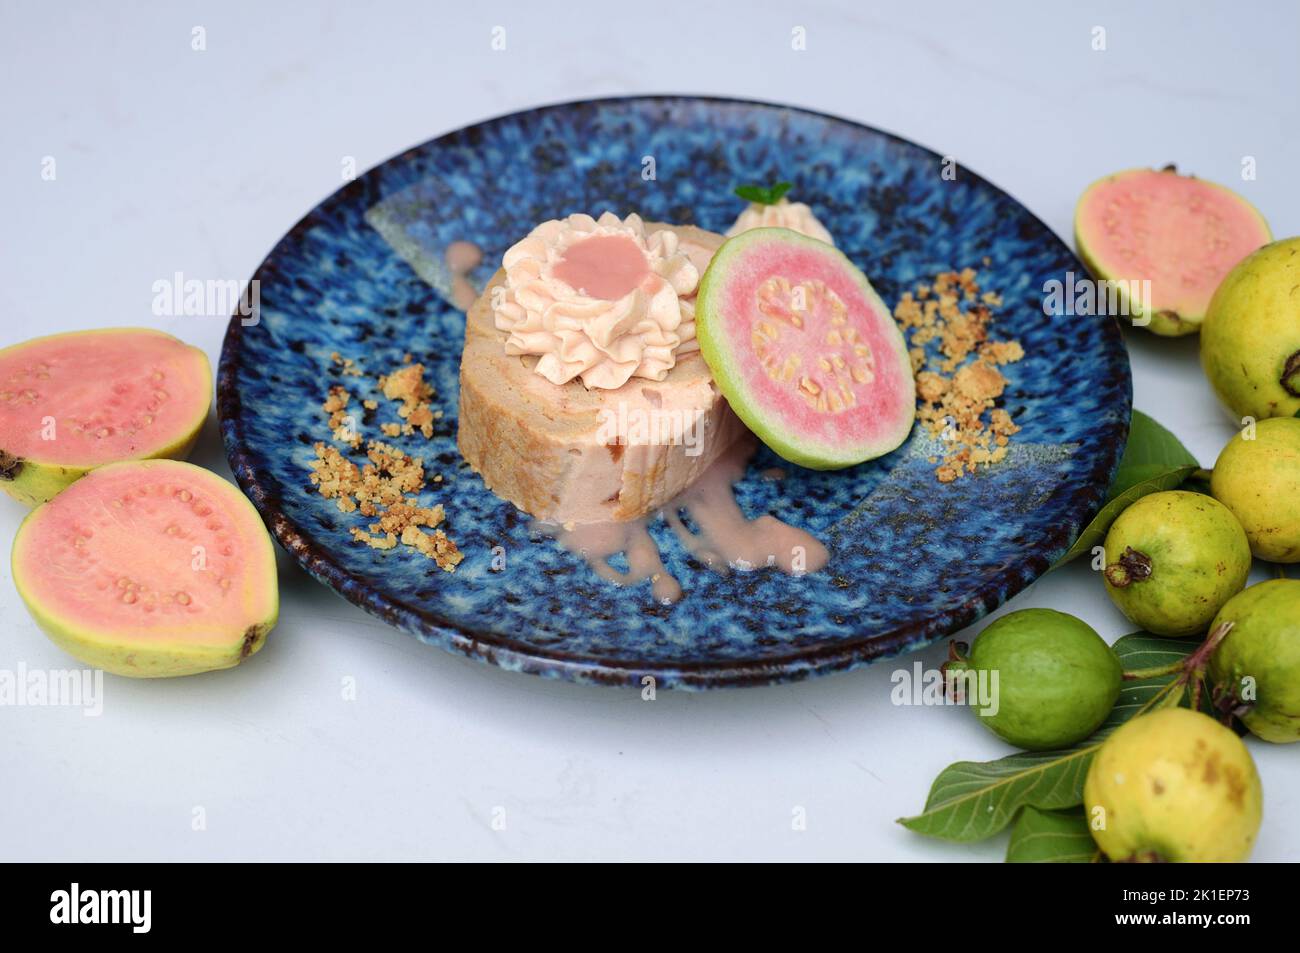 Guava Roll Cake on blue plate on light background with ripe guava fruit Stock Photo